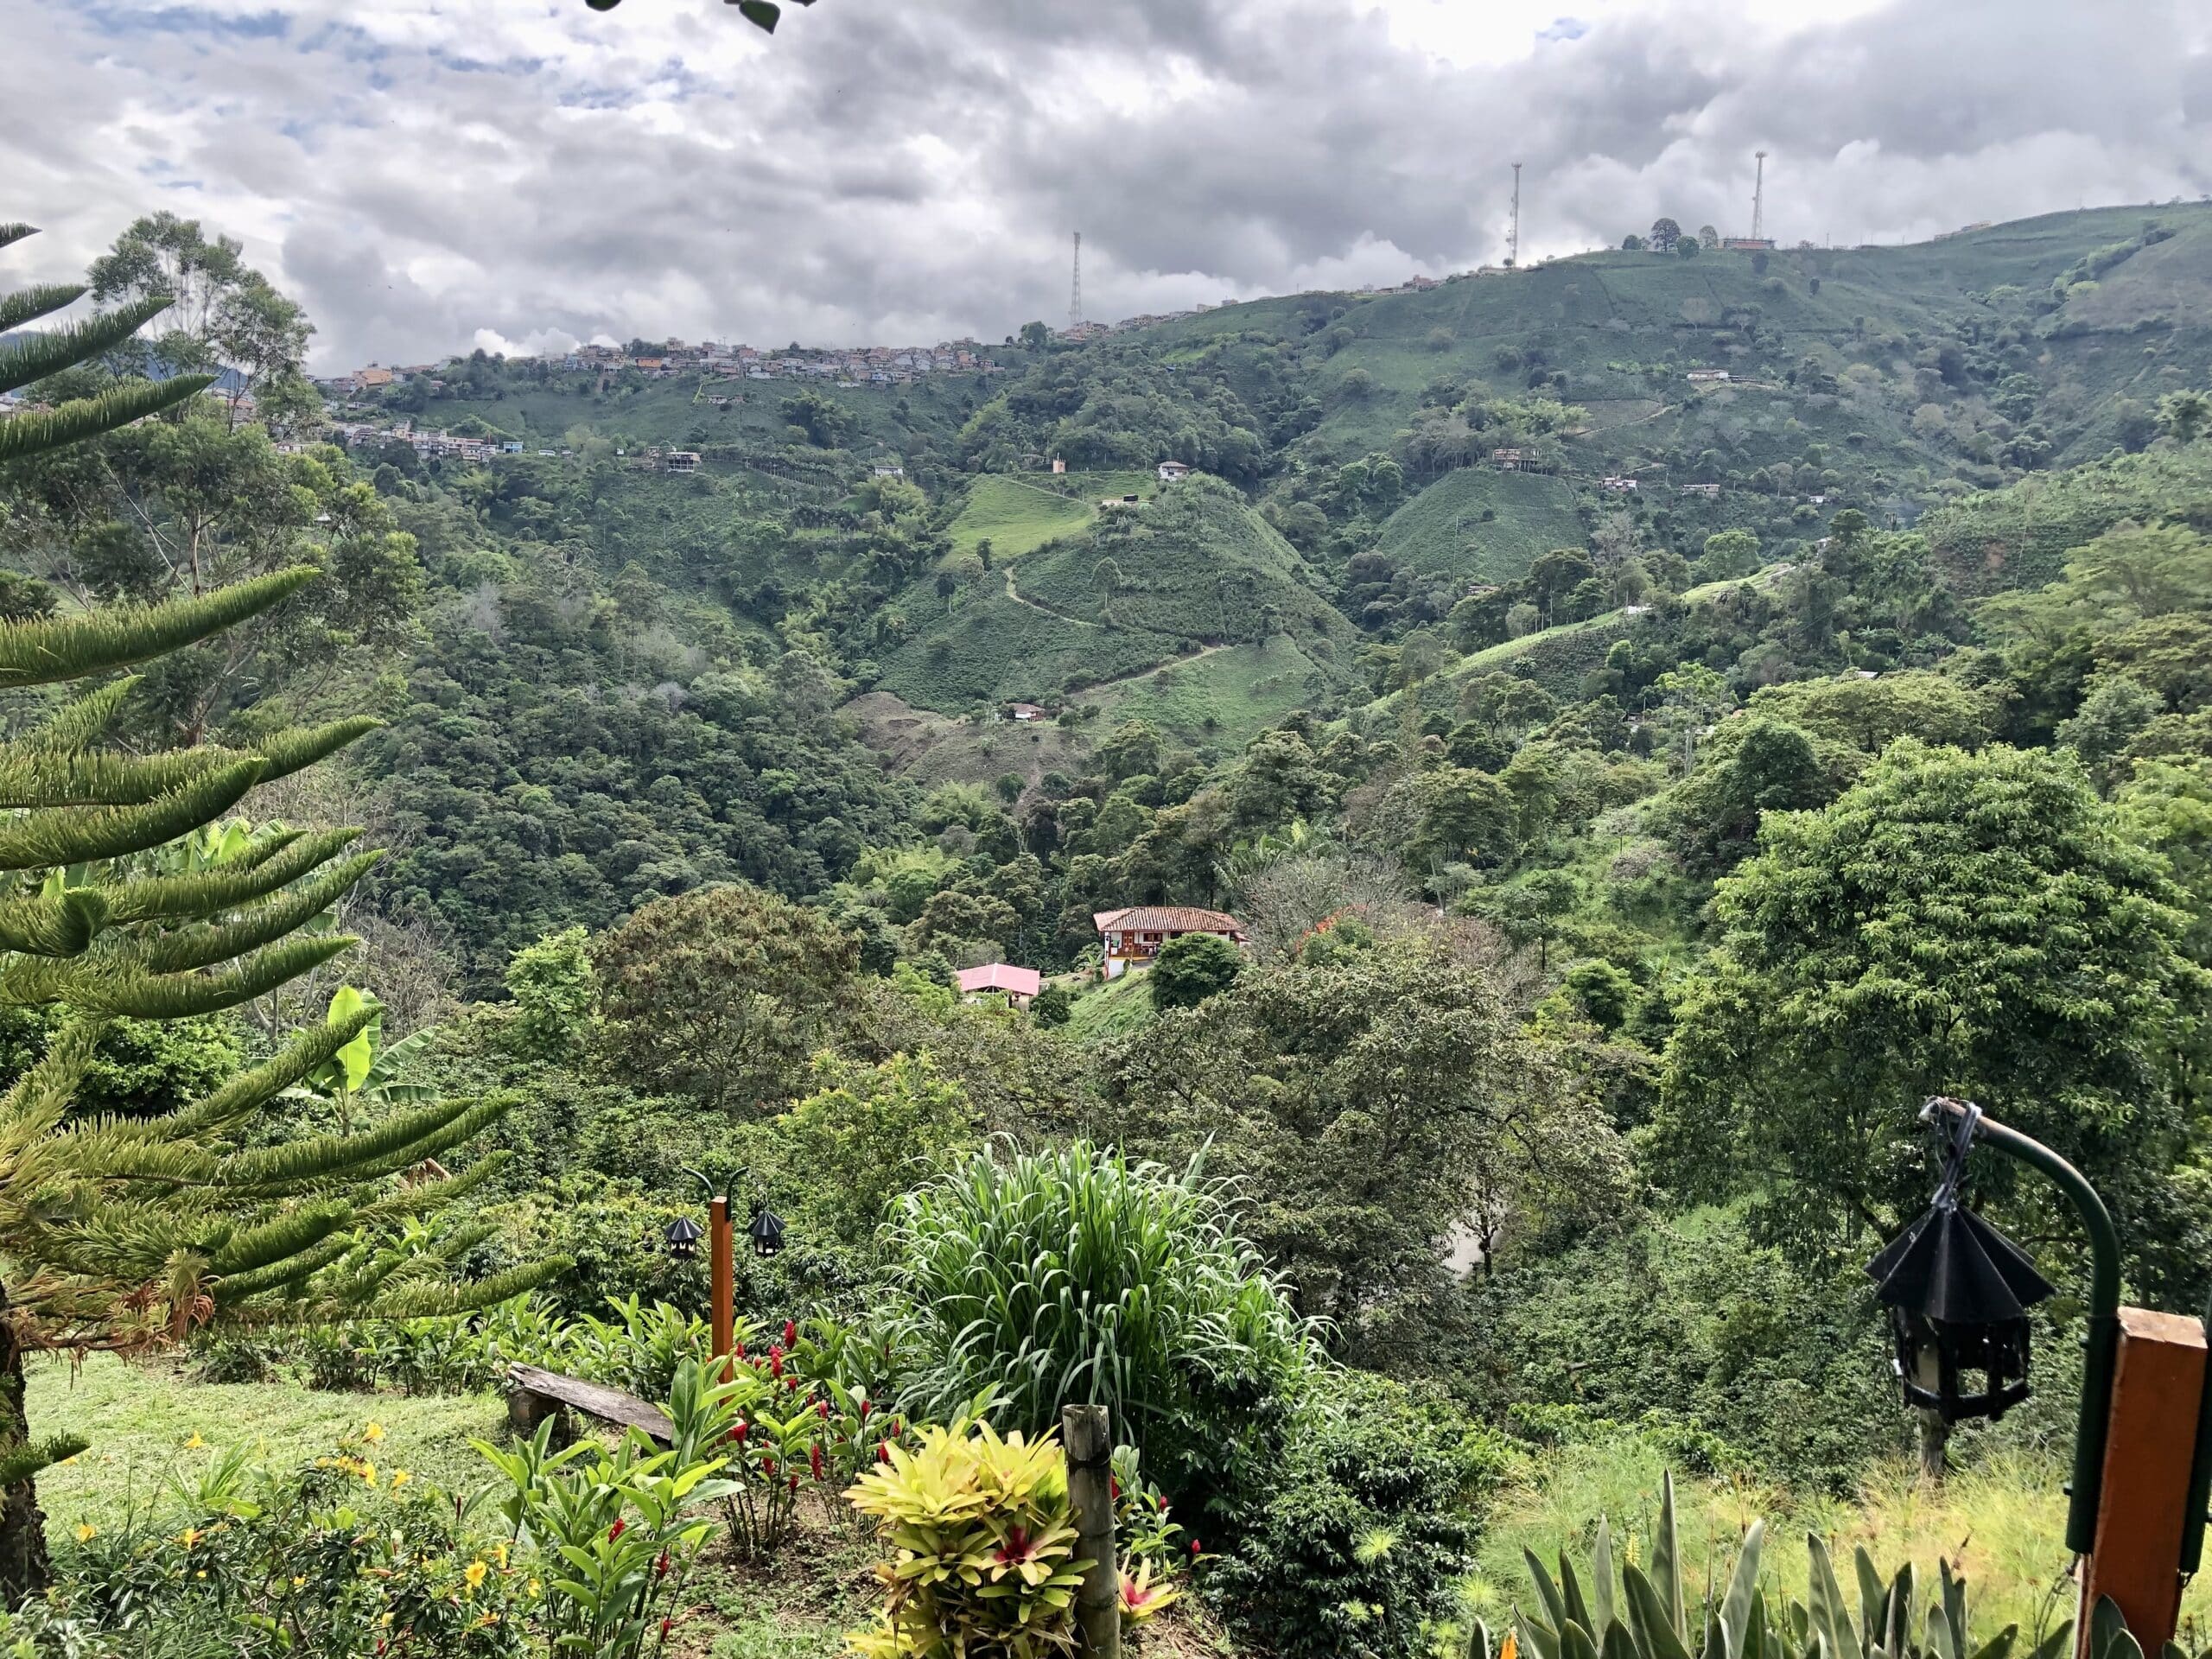 Coffee plantations in Colombia - Phoenix Travel Groupl